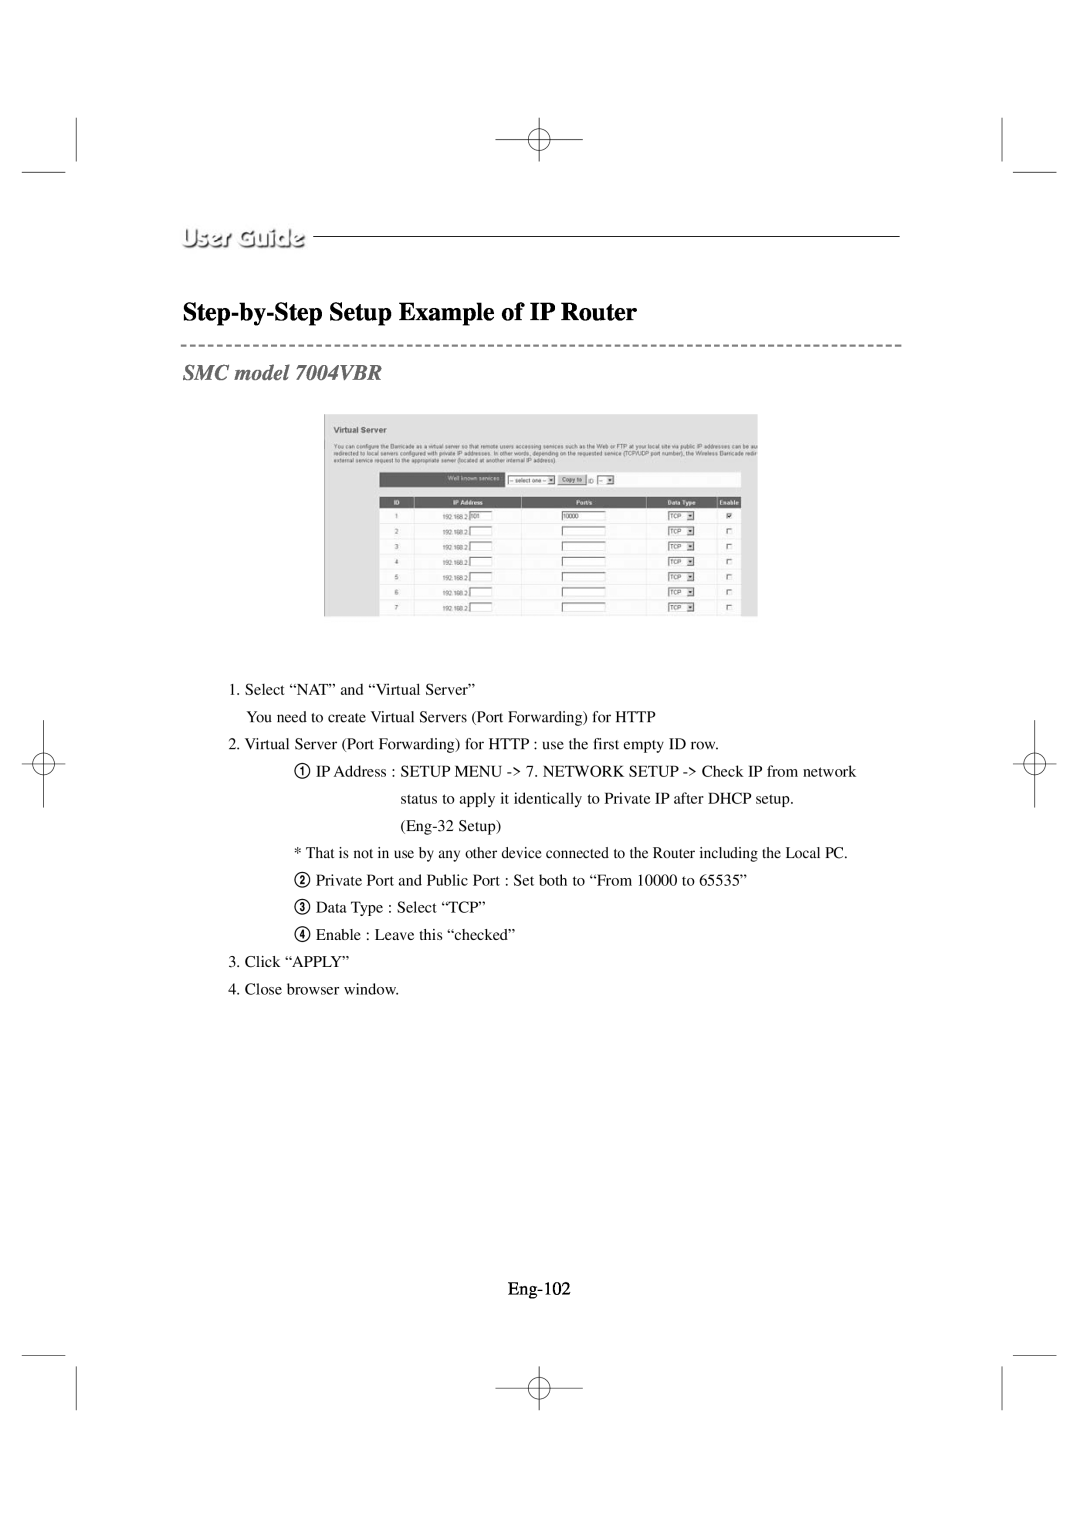 Samsung SSC17WEB manual SMC model 7004VBR, Step-by-StepSetup Example of IP Router, Eng-102 